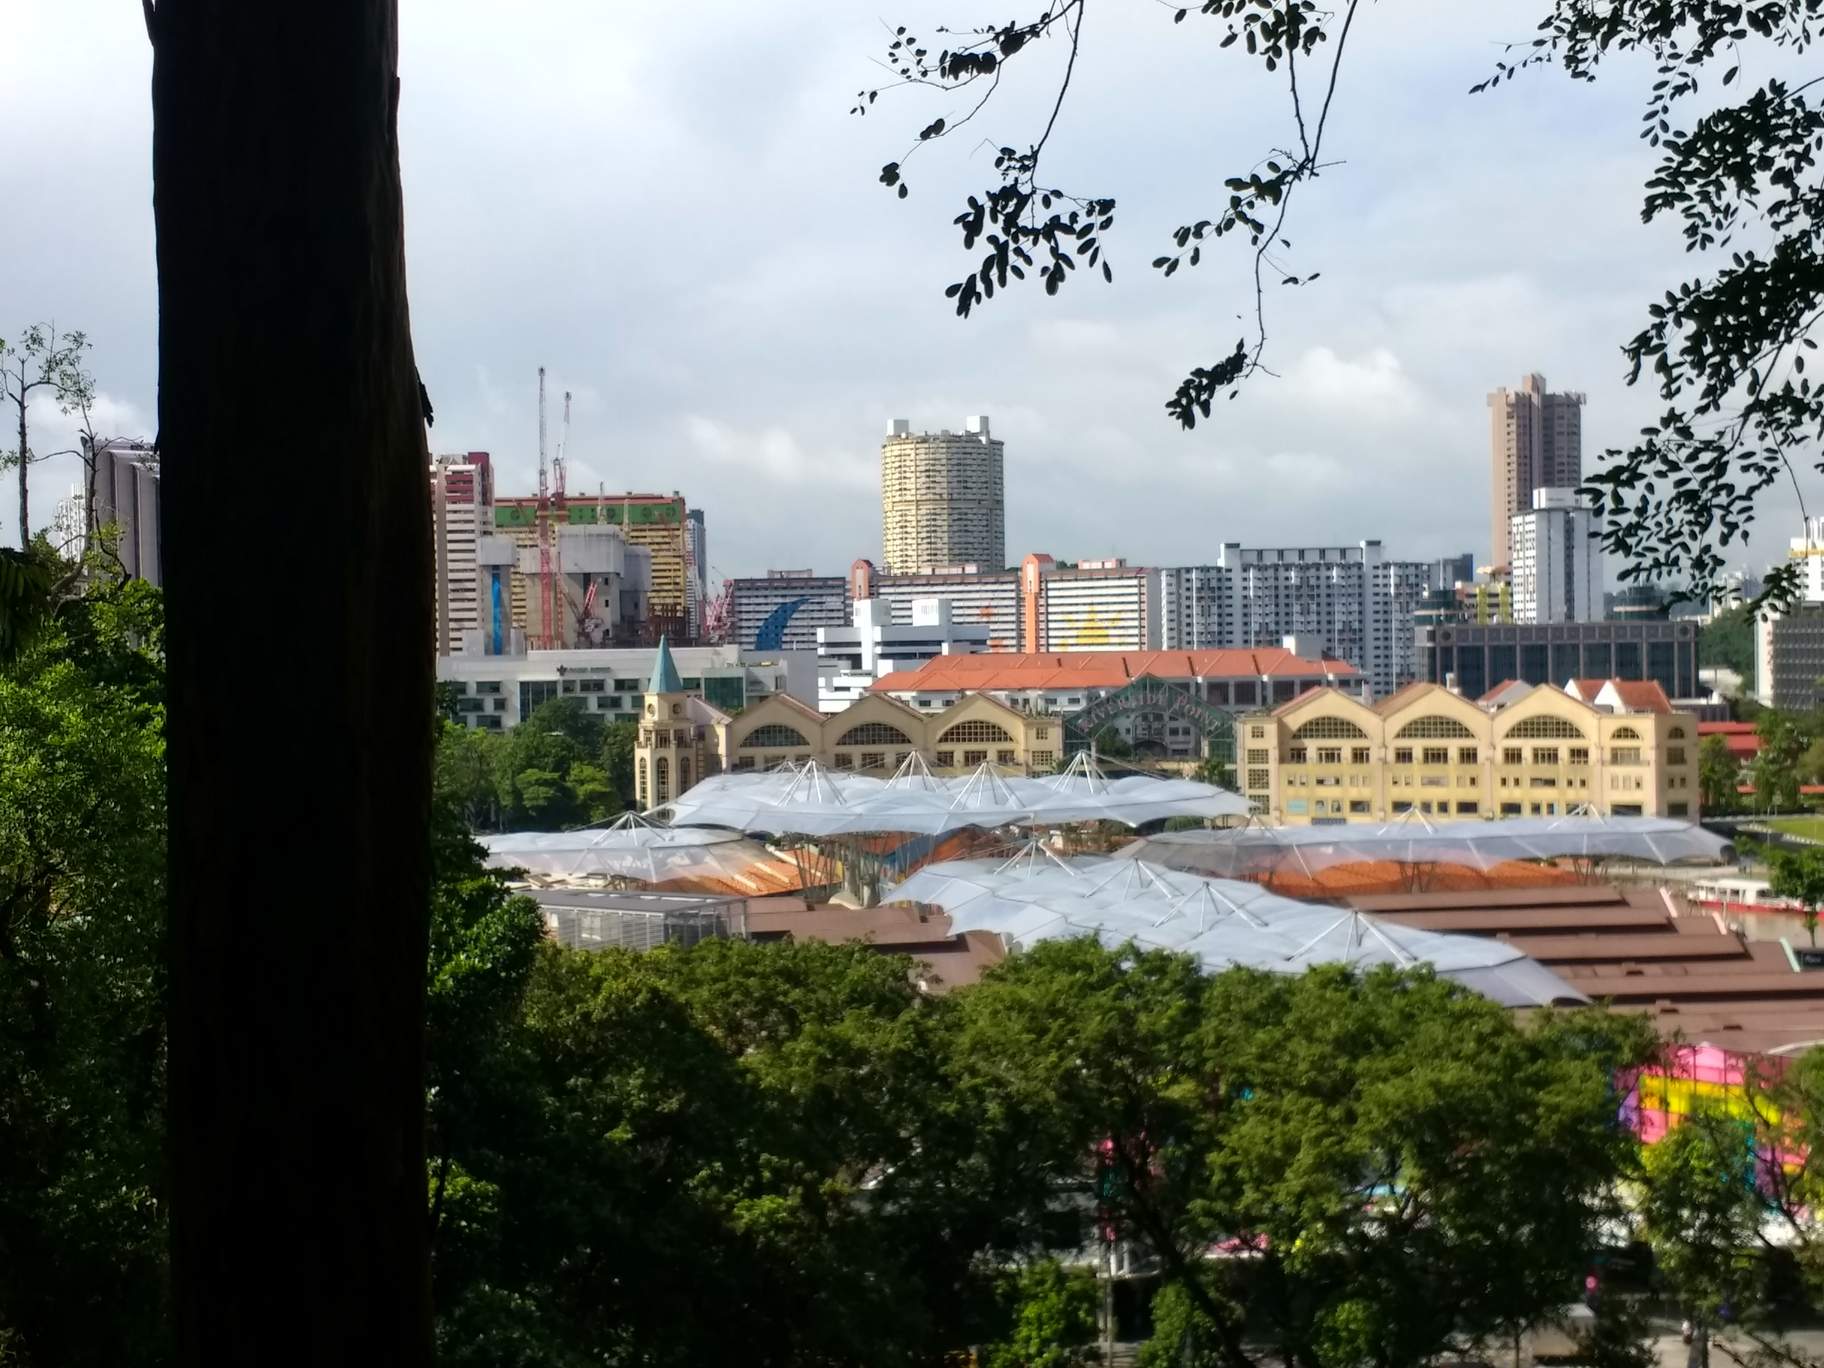 View towards Clarke Quay from Fort Canning Park, Singapore.